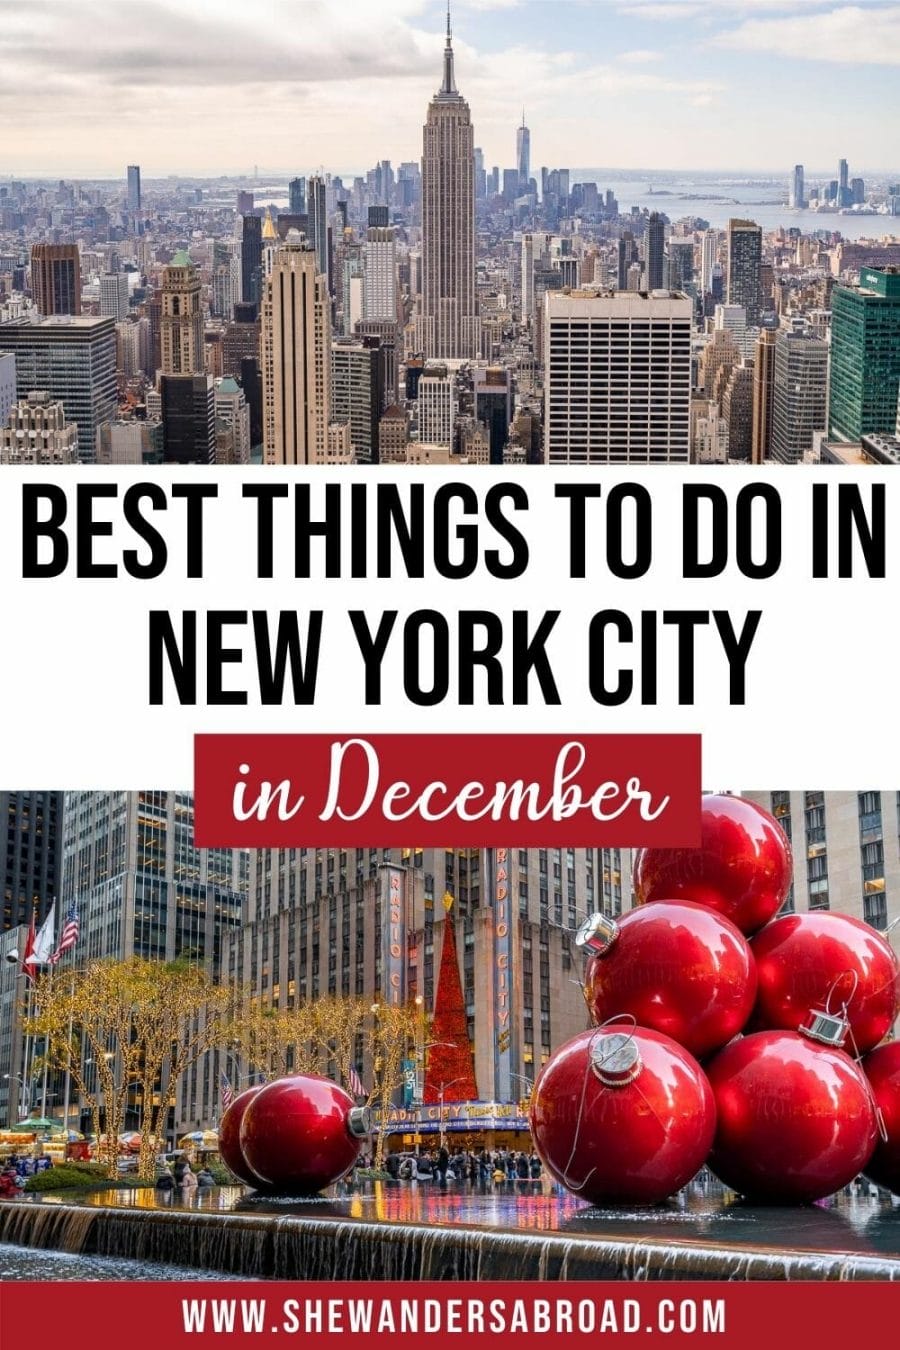 15 Festive Things to Do in New York City in December